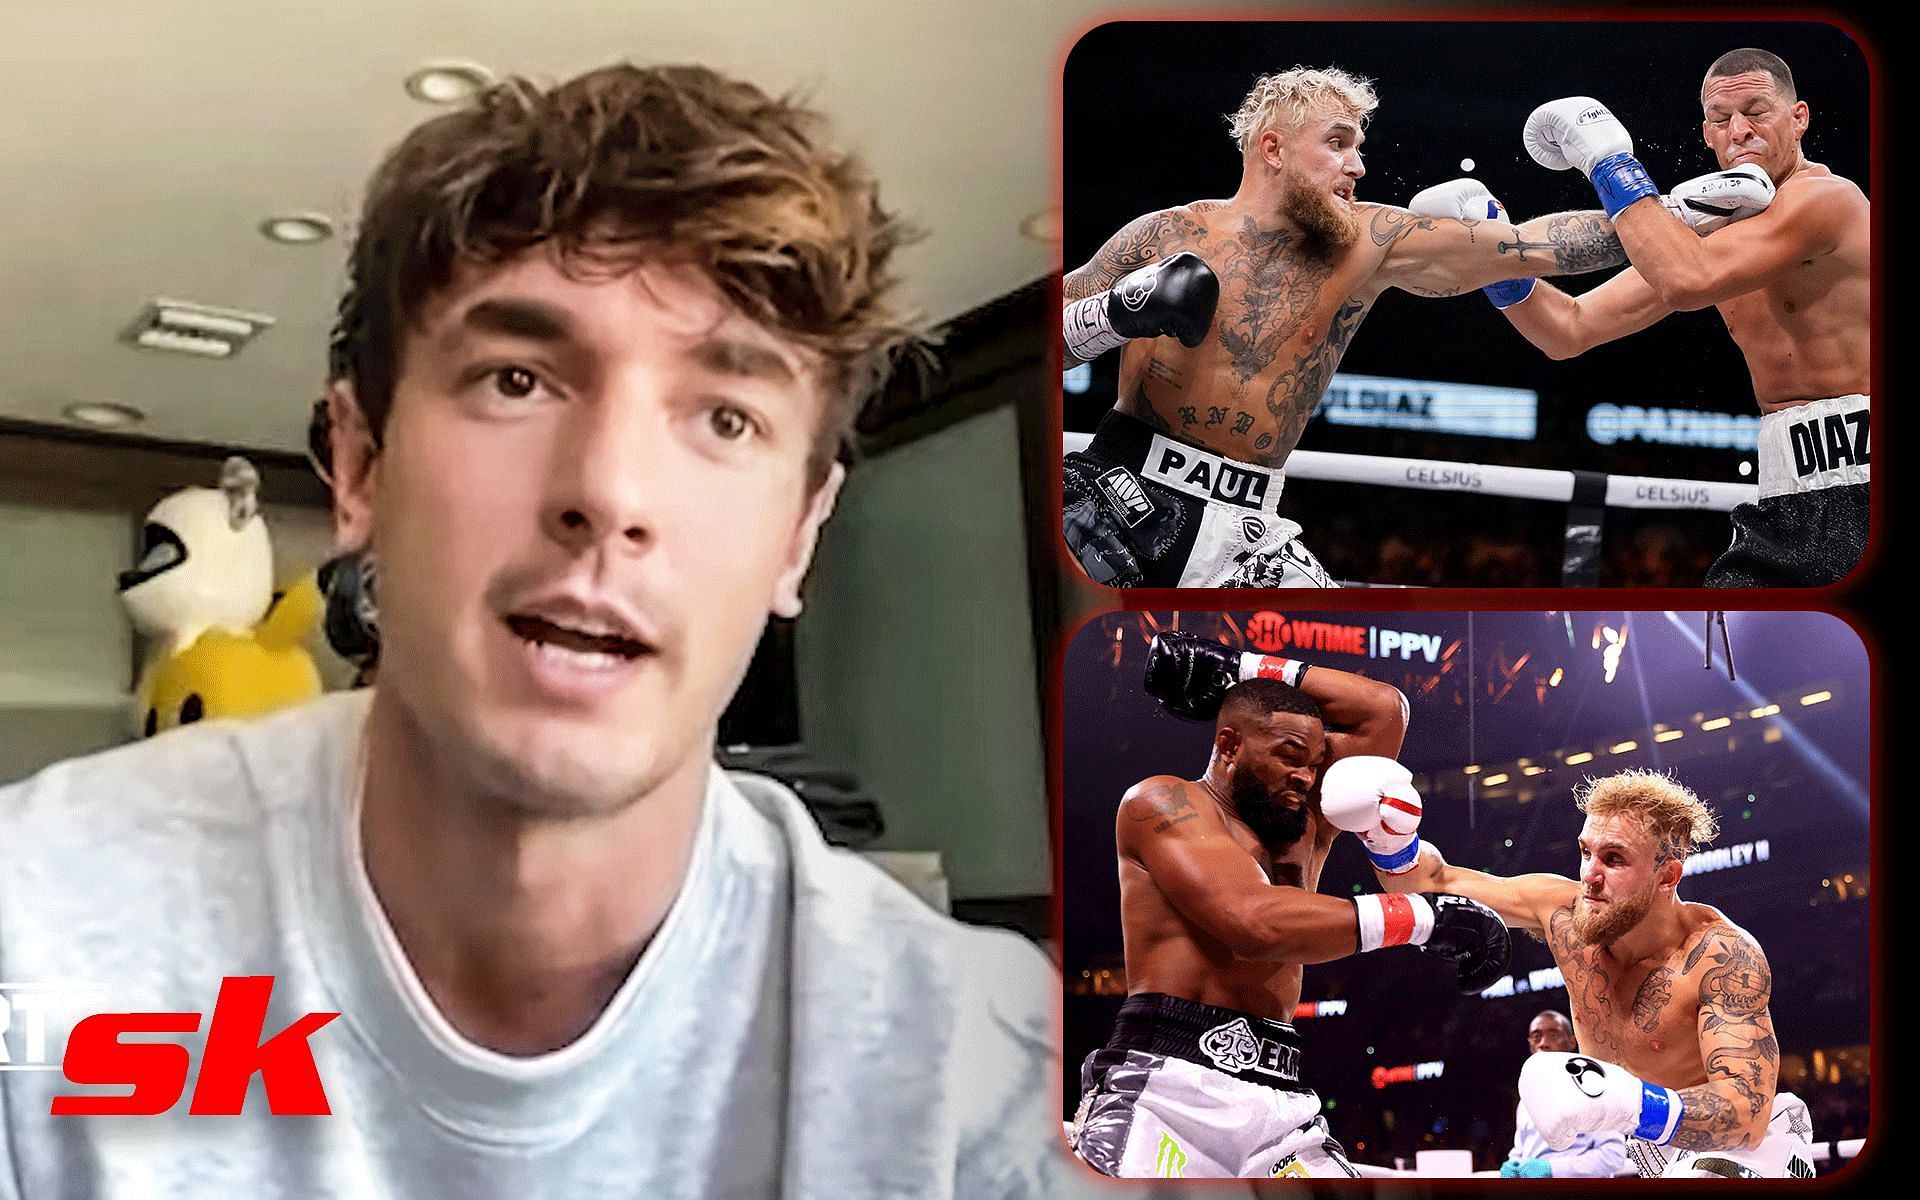 Bryce Hall (Left); Jake Paul vs. Nate Diaz (Top Right); Tyron Woodley vs. Jake Paul 2 (Bottom Right) [*Image courtesy: left image via TMZ Sports YouTube channel; right images via Getty Images]